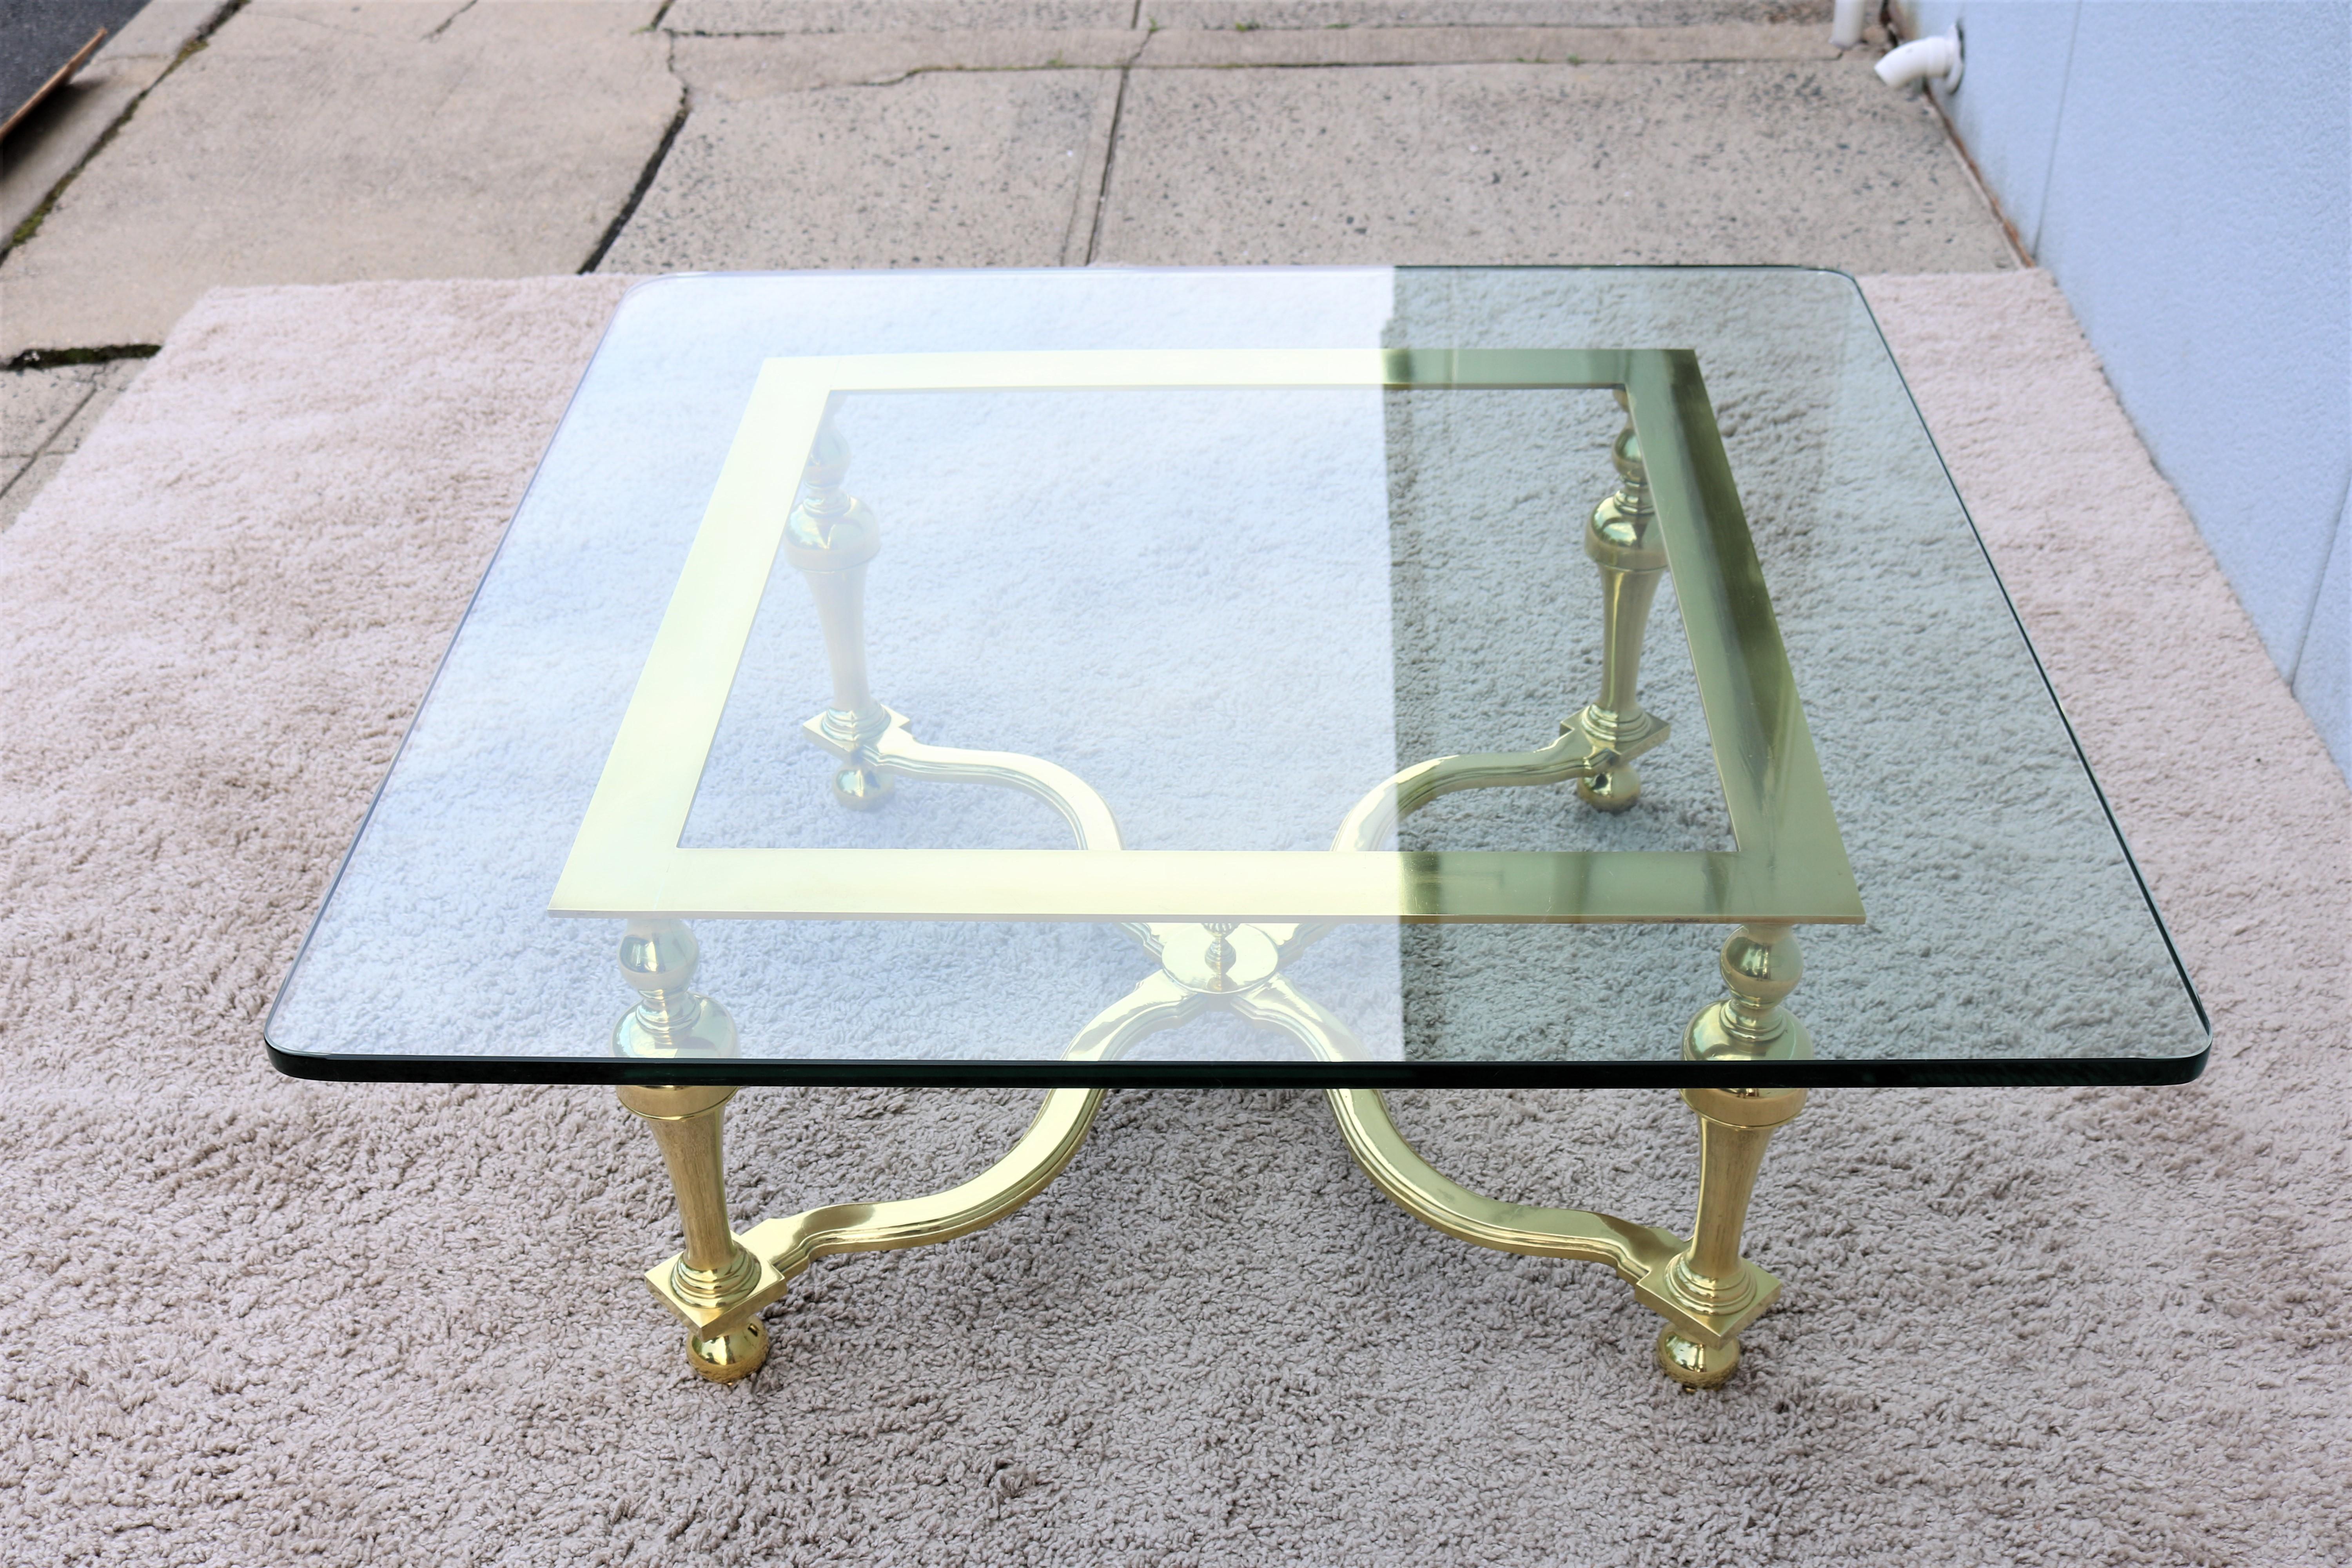 1970s Hollywood Regency Maison Jansen Style Brass and Glass Square Coffee Table In Good Condition For Sale In Secaucus, NJ